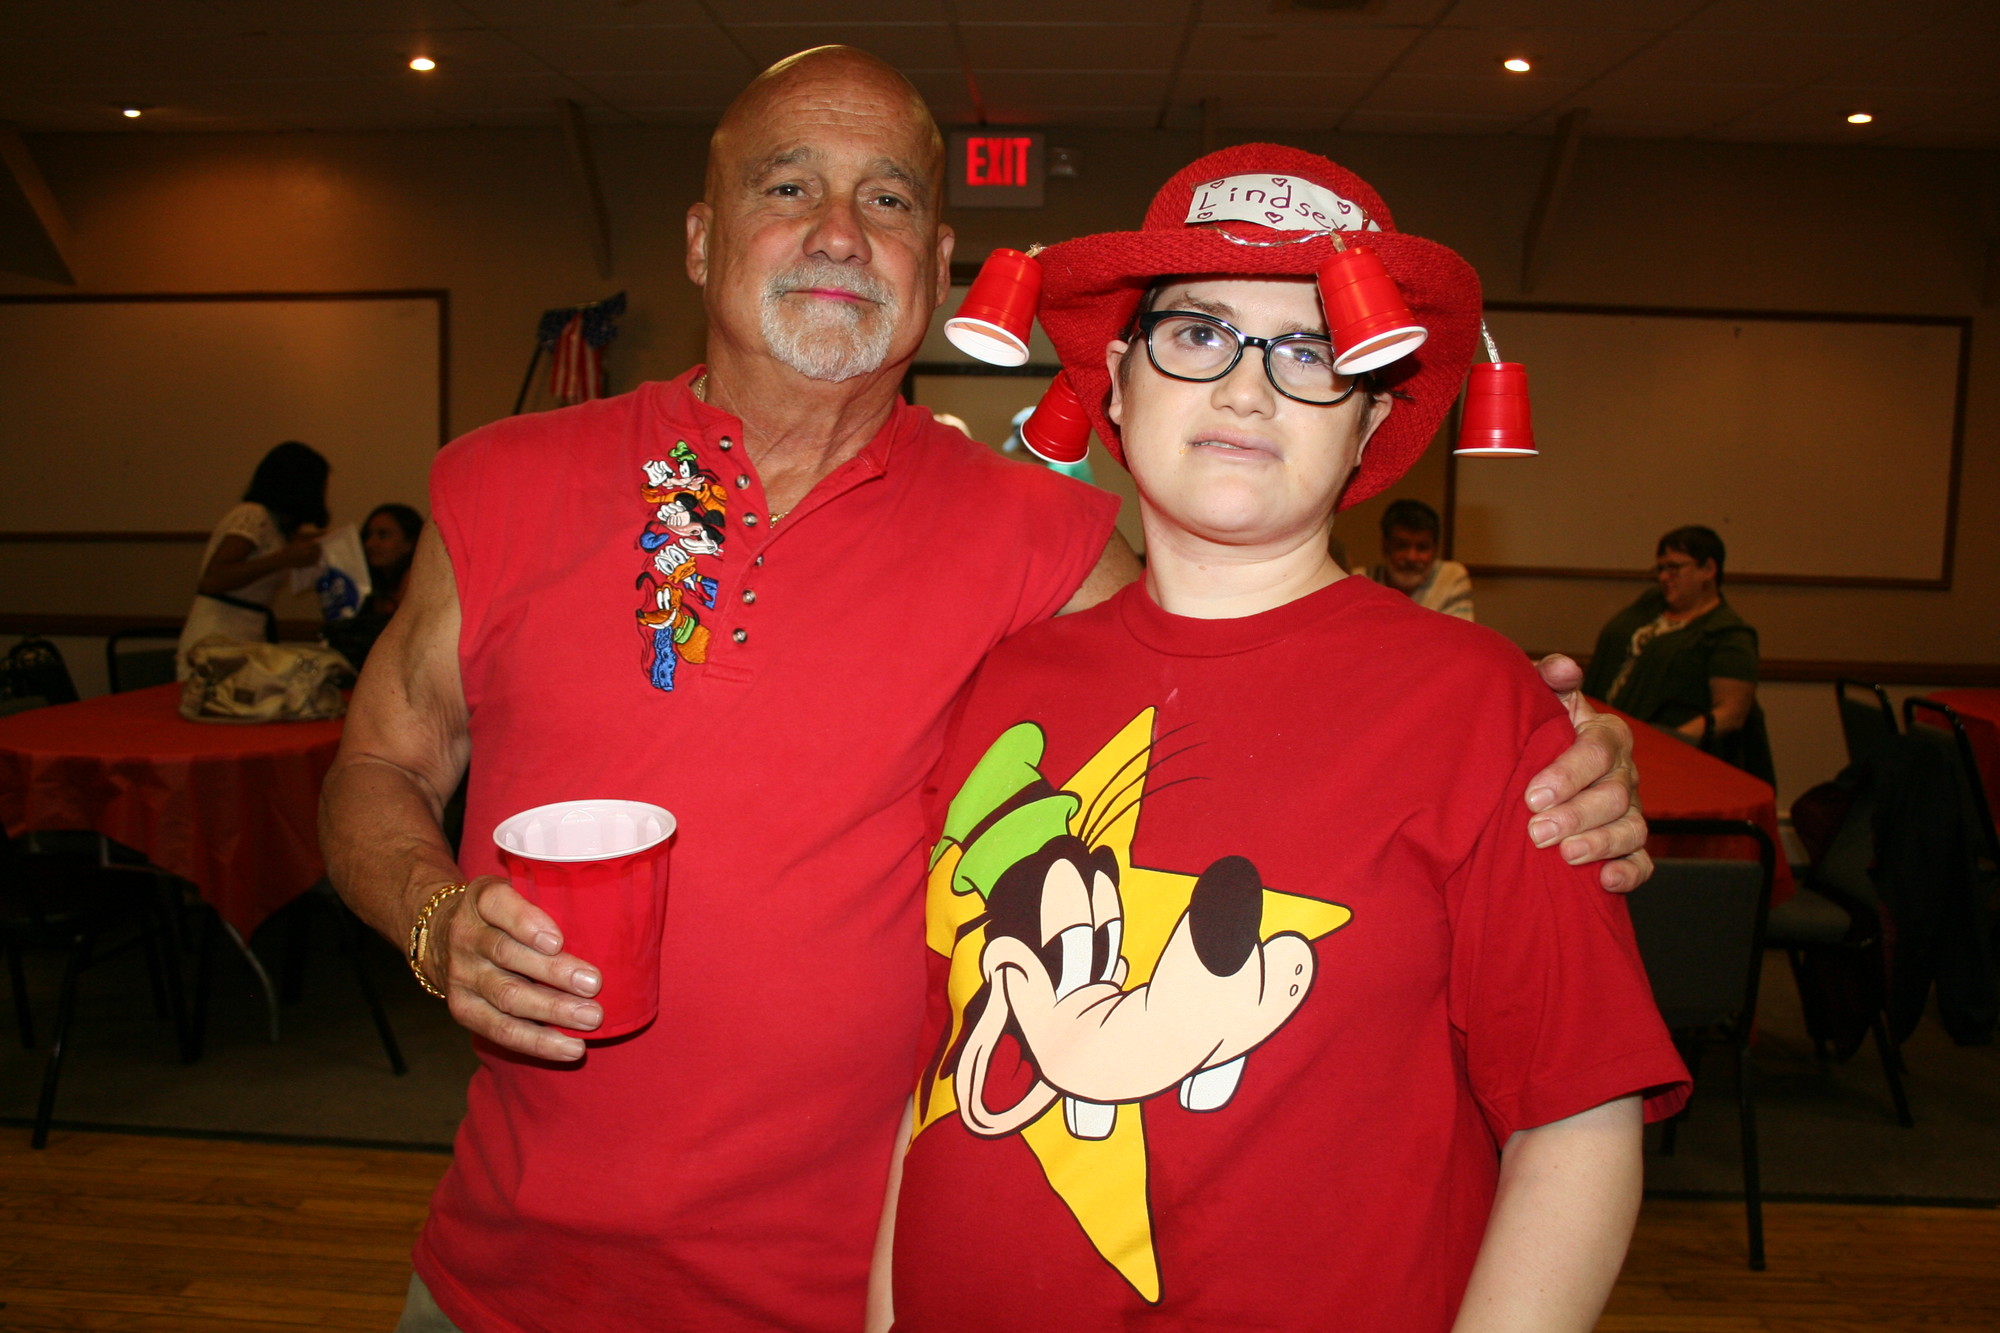 Ernie Dipasque and his daughter Lindsey, who helped organize the event showed off their Red Solo Cups.